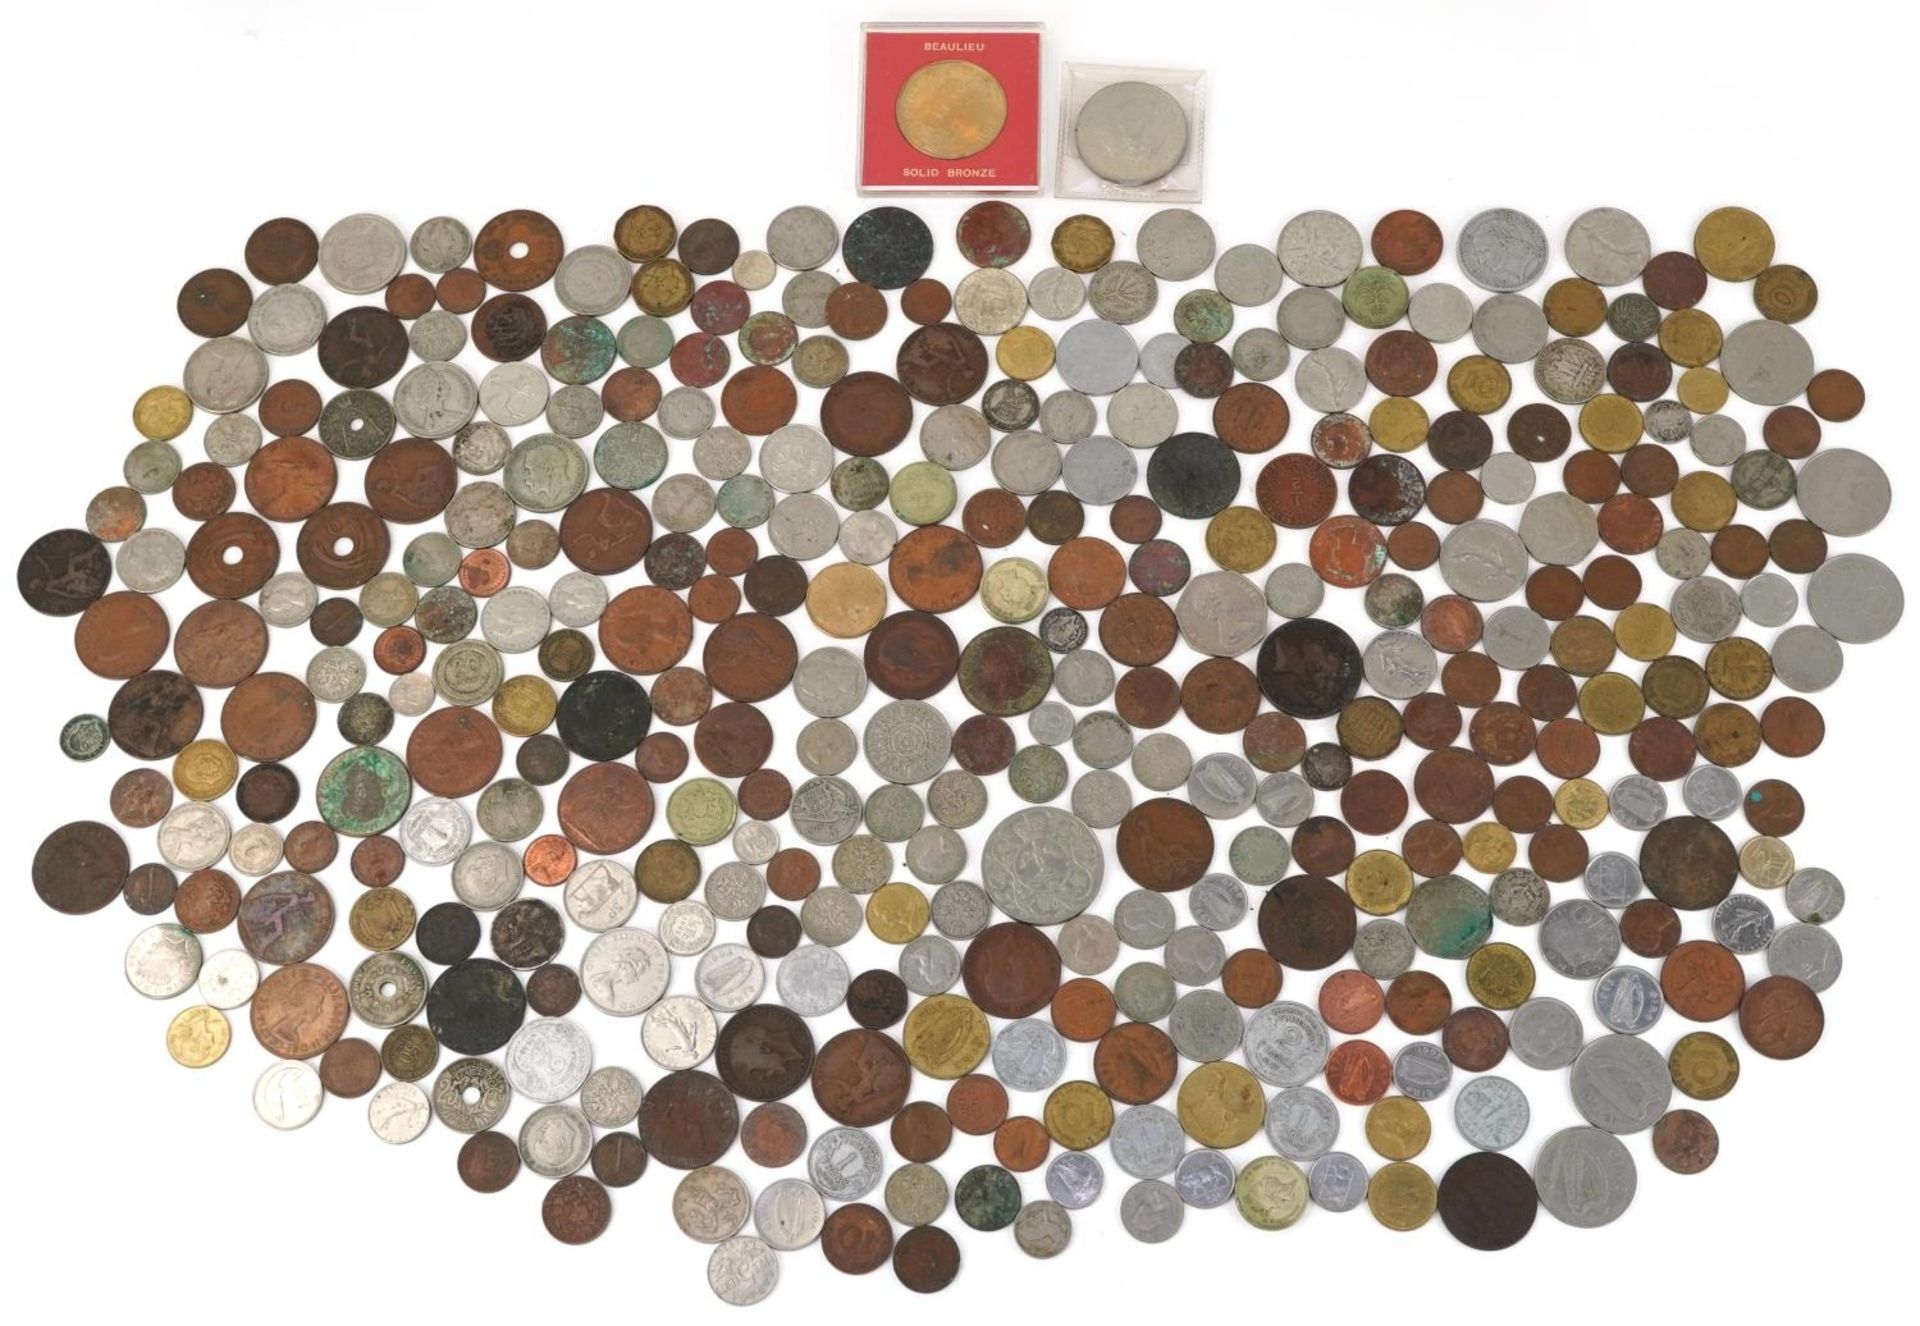 Antique and later British and world coinage including pound coins